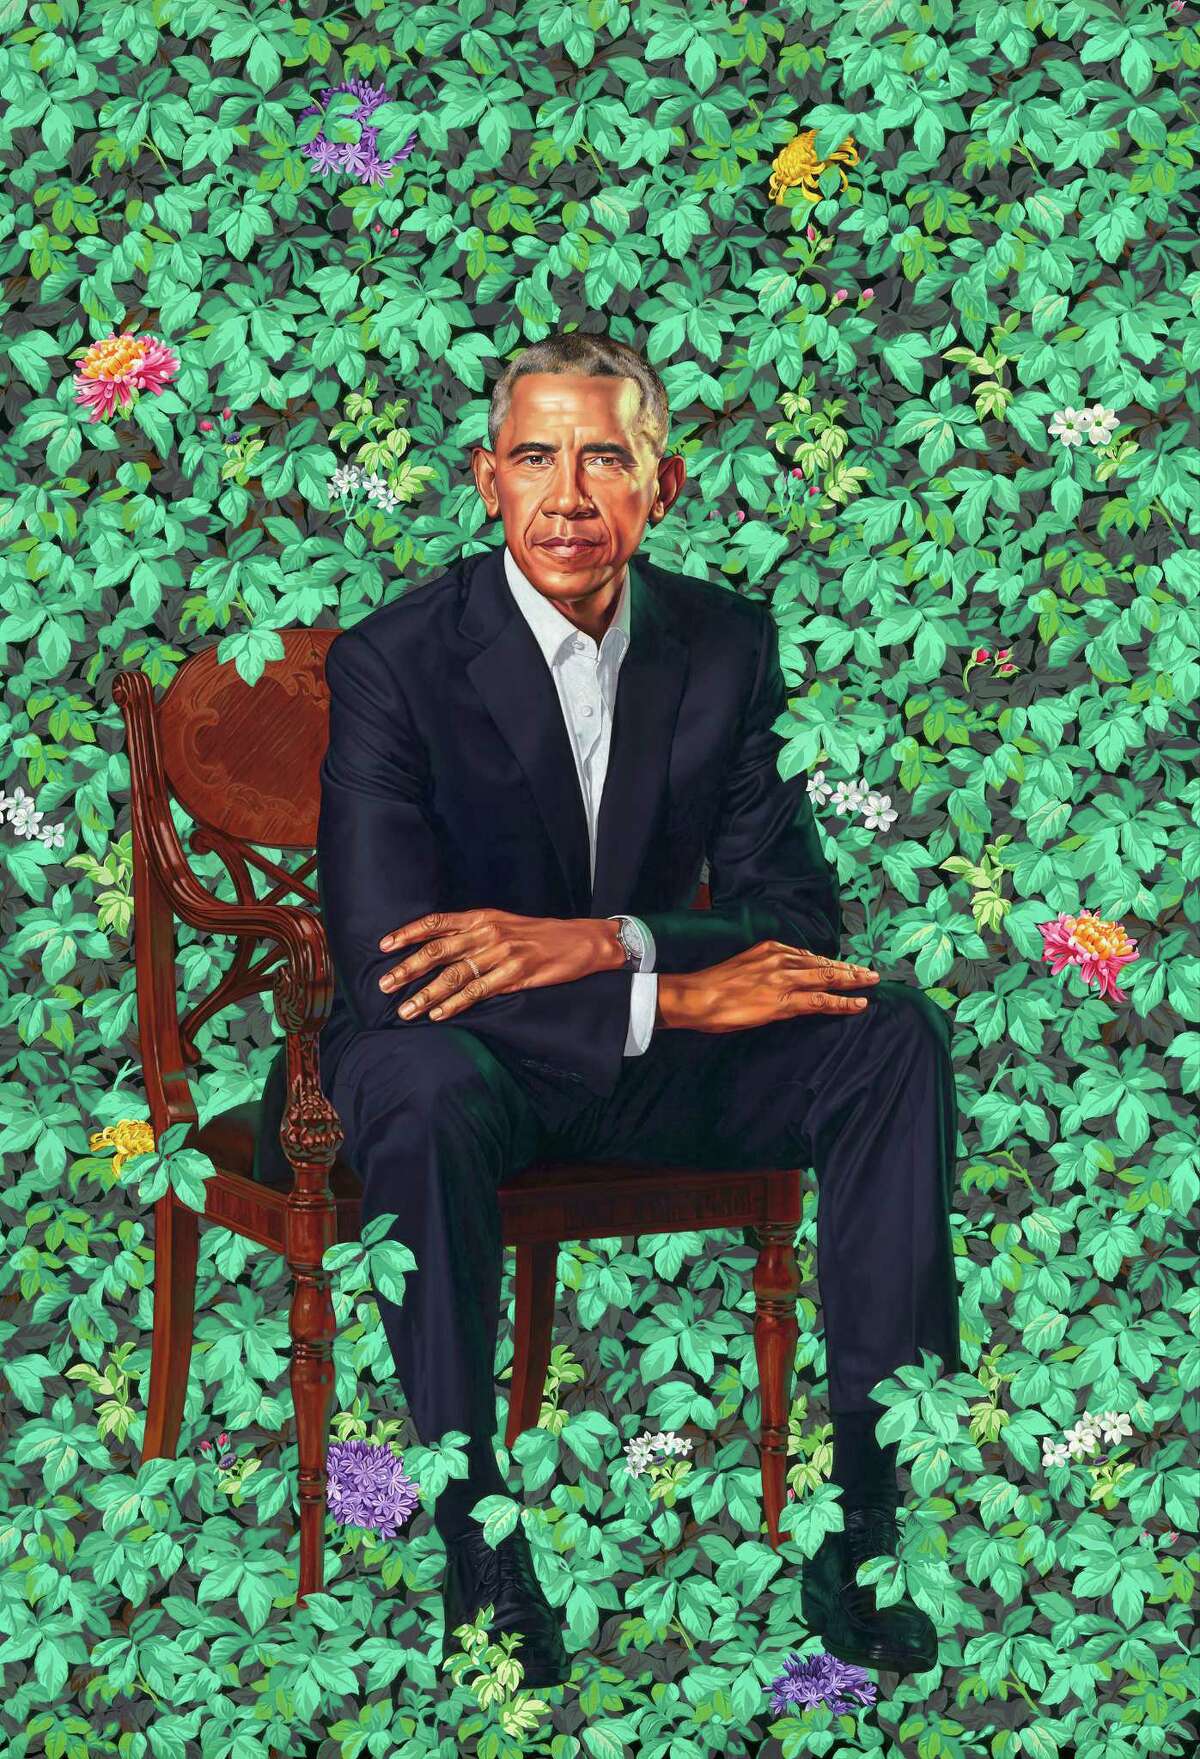 Former President Barack Obama's portrait by Kehinde Wiley, oil on canvas, unveiled at the National Portrait Gallery in Washington. (